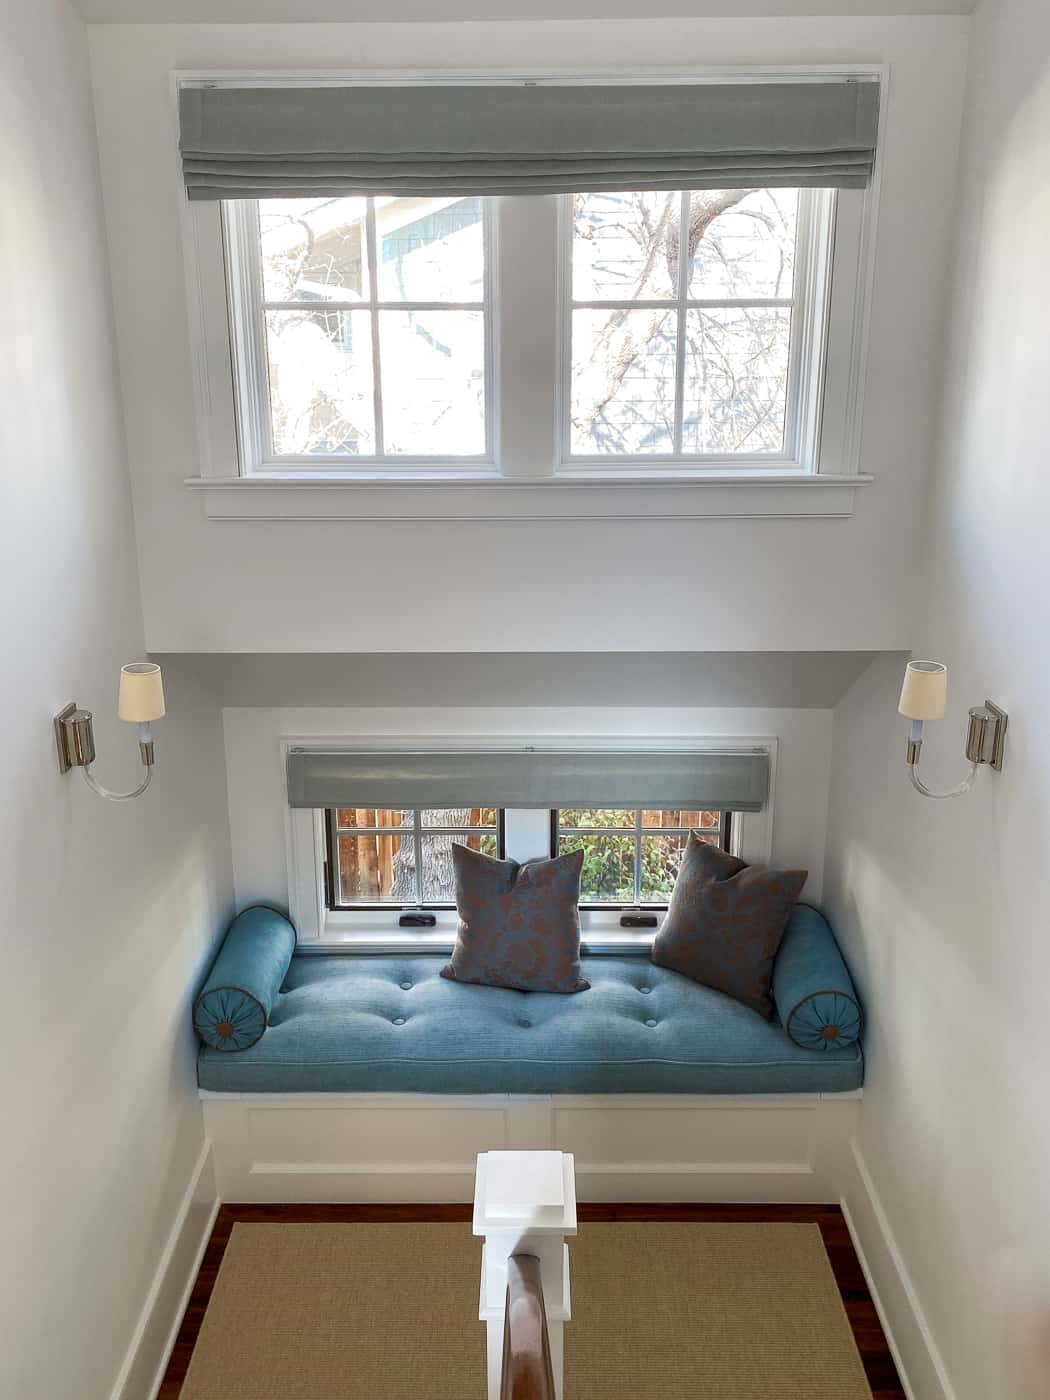 Staircase landing with upholstered window seat